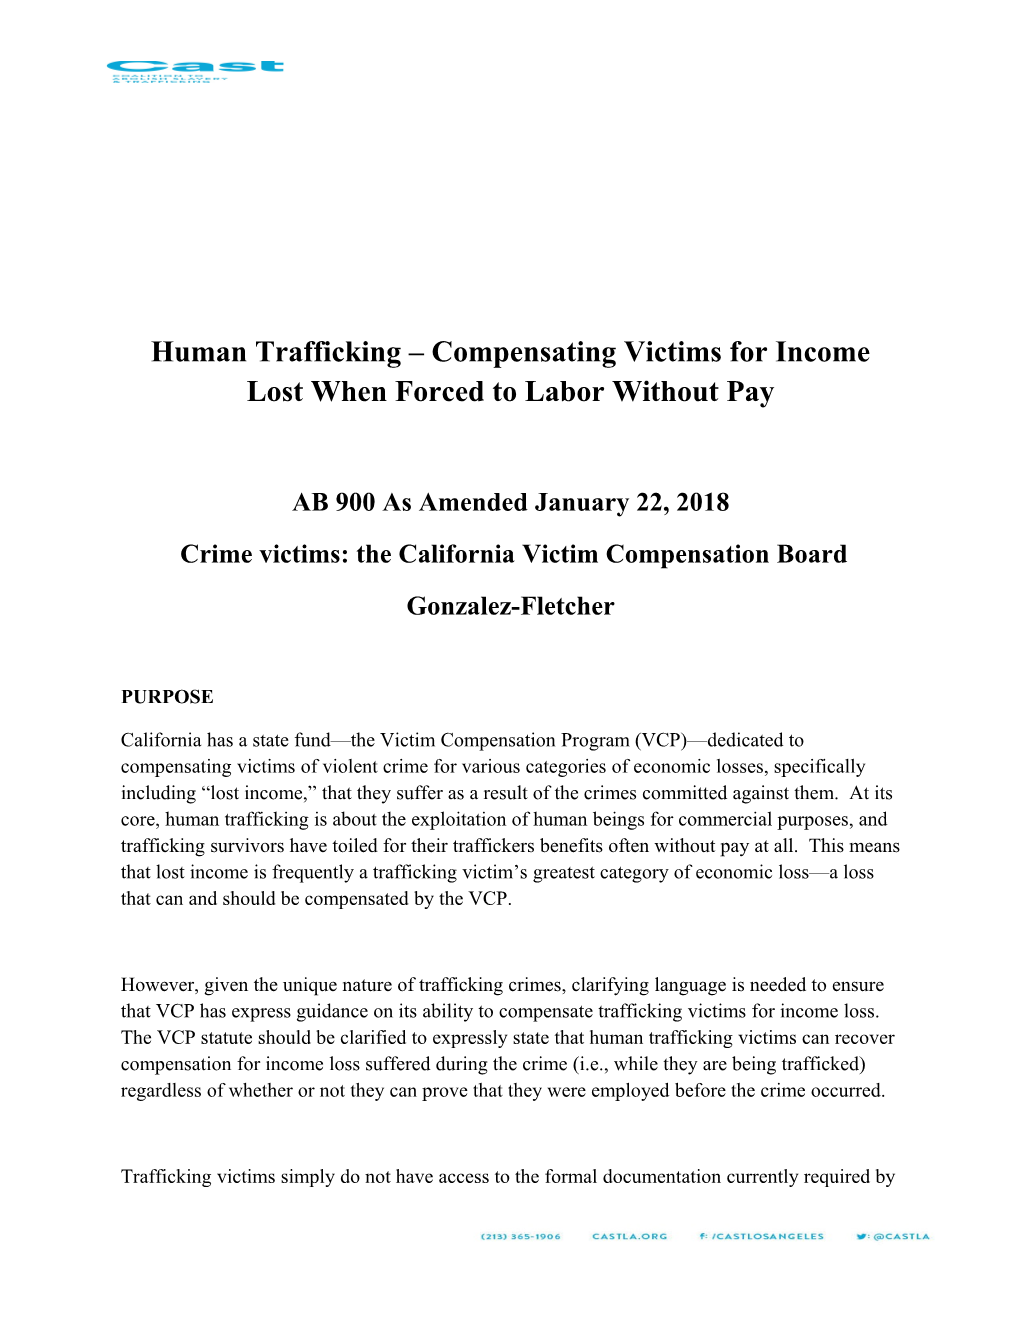 Human Trafficking Compensating Victims for Income Lost When Forced to Labor Without Pay